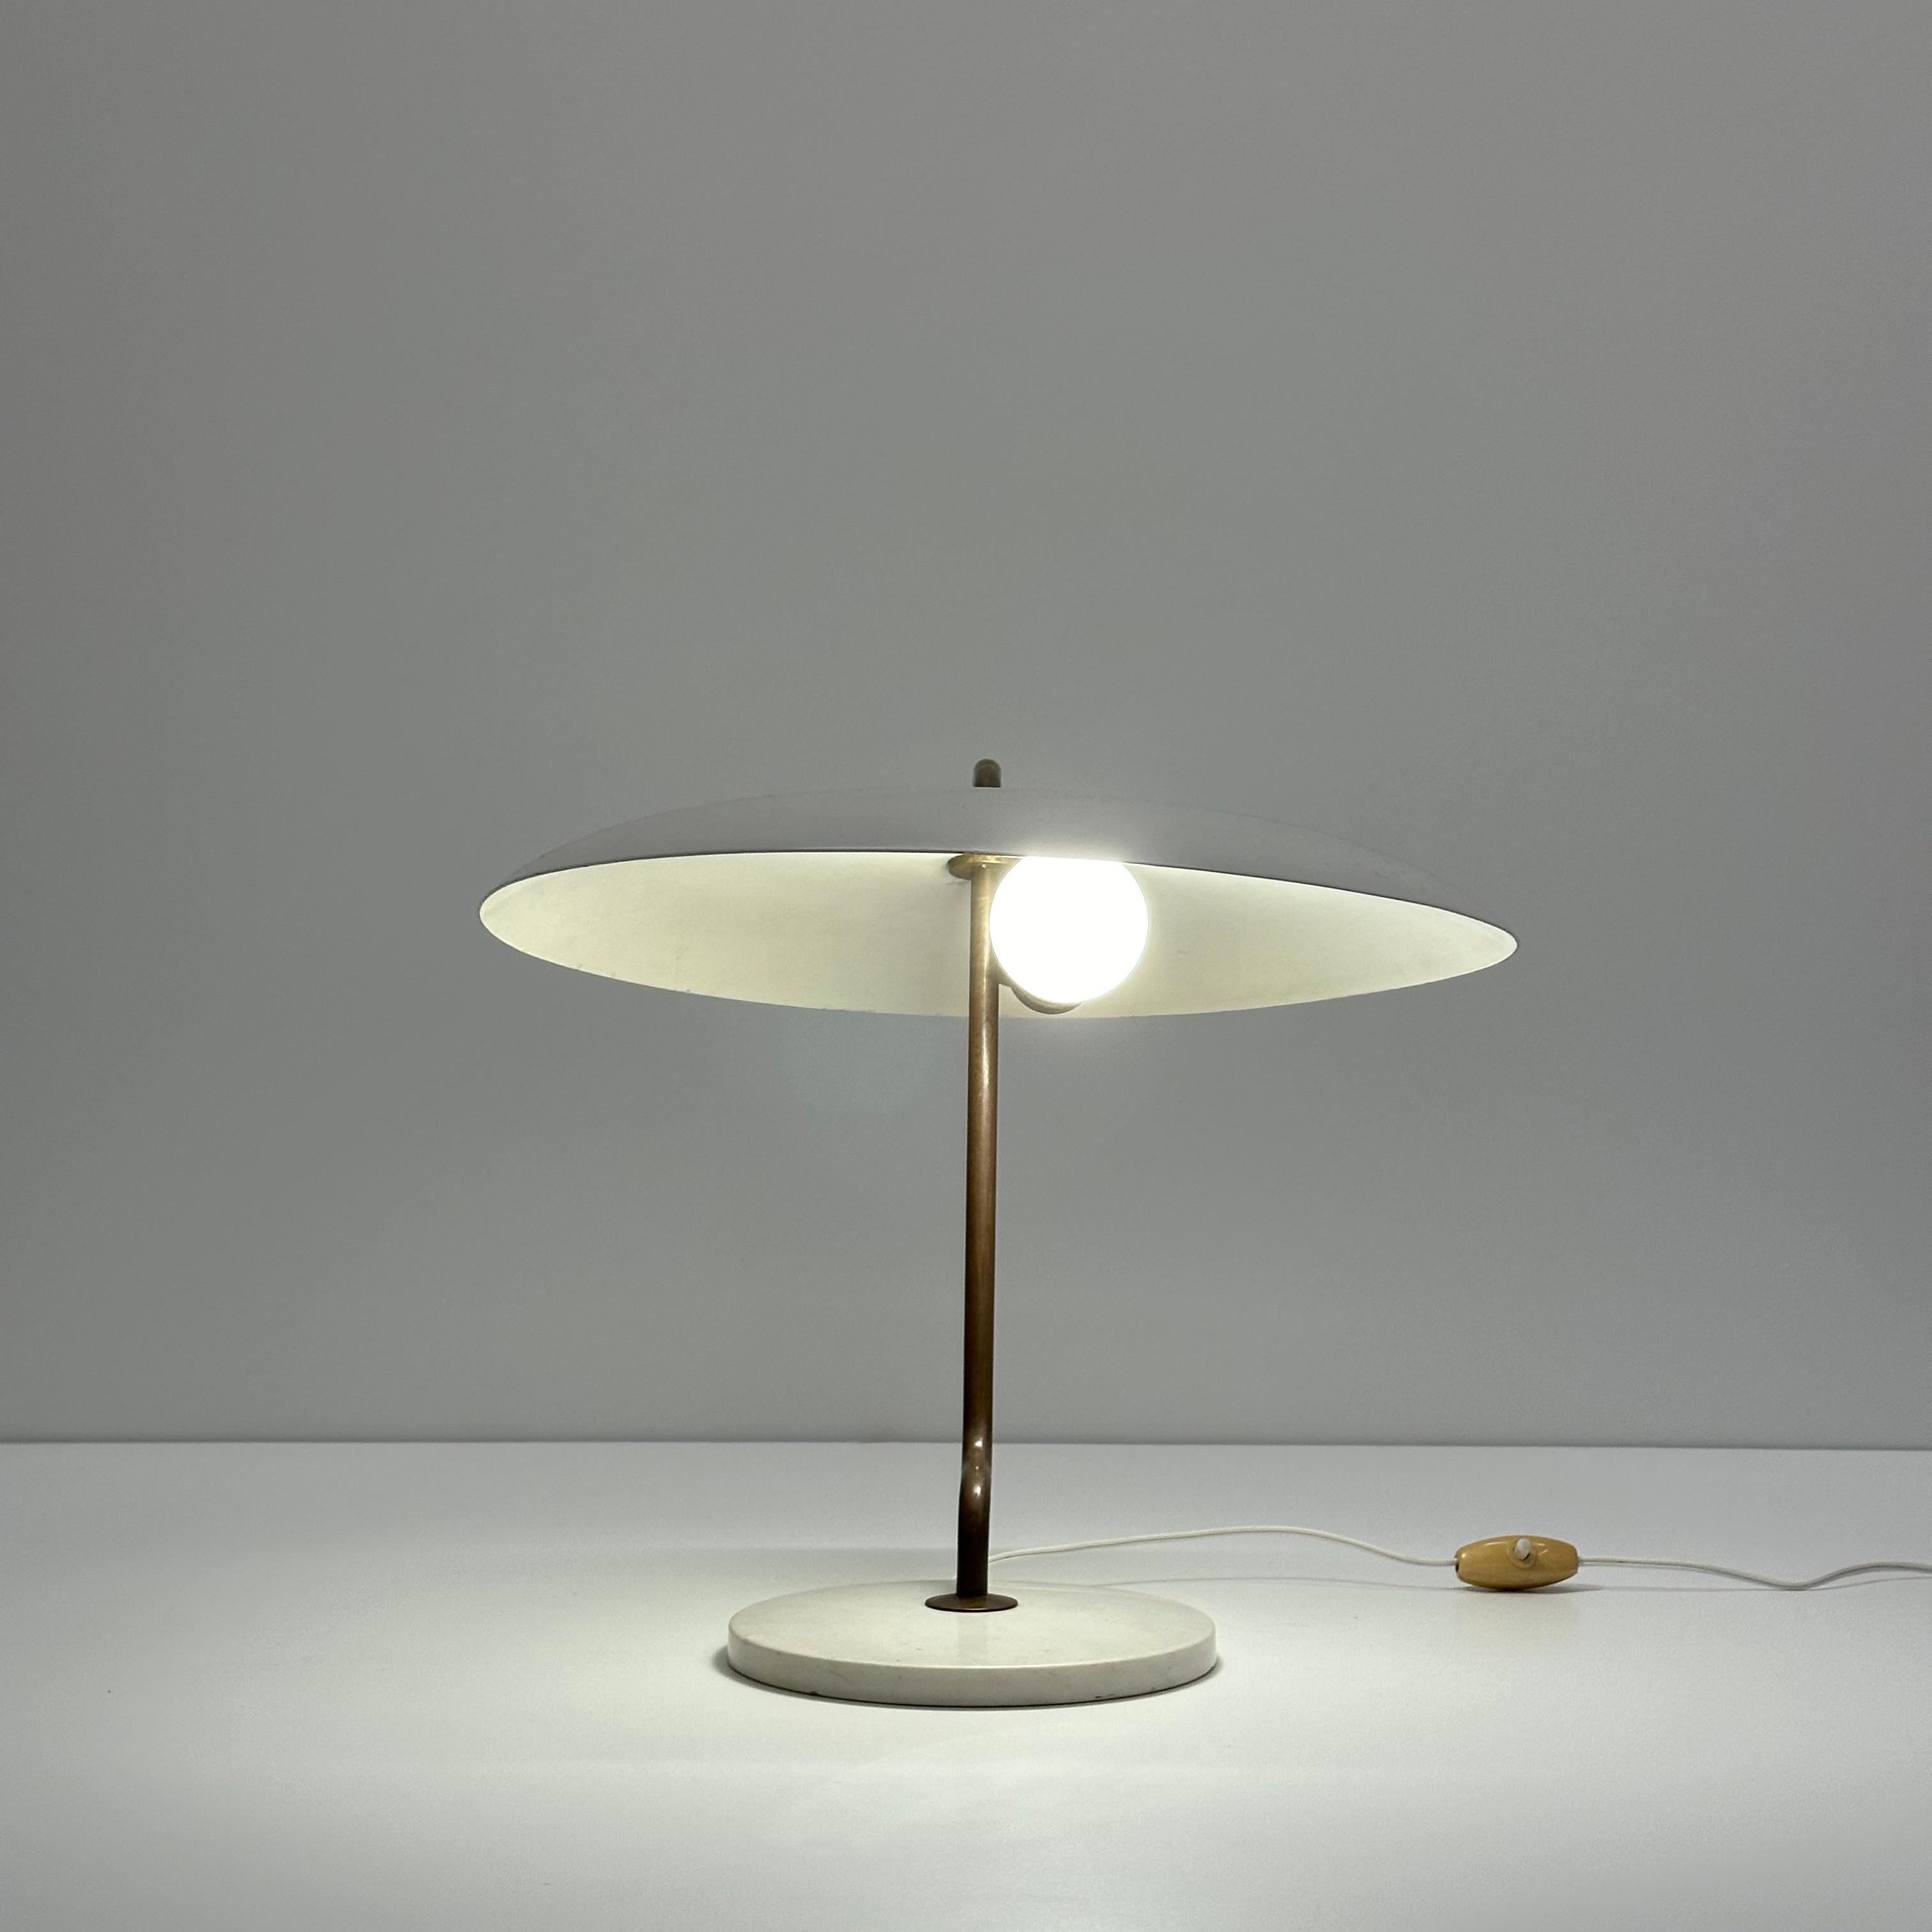 Gino Sarfatti early red model 537 table lamp for Arteluce, Italy, 1956

Additional Information:
Materials: Enameled aluminum, marble, brass
Dimensions: 14 1/2